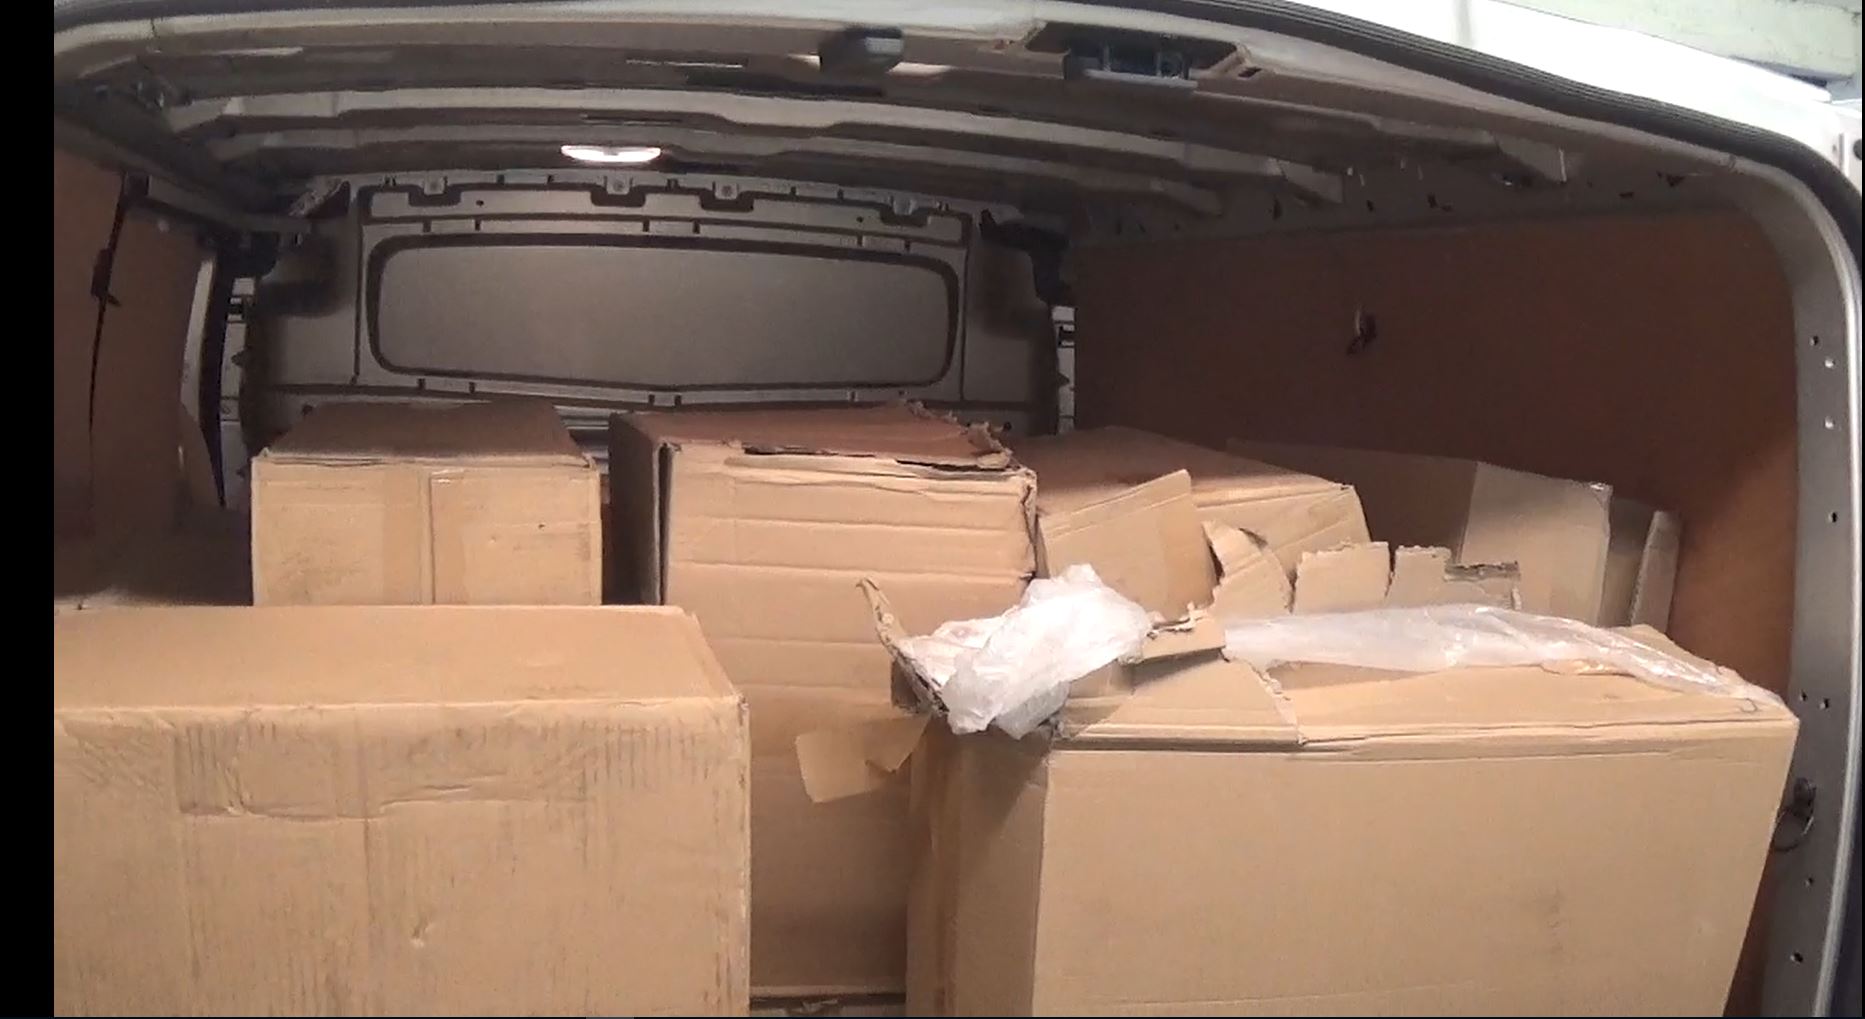 Police found several boxes containing thousands of cigarettes.